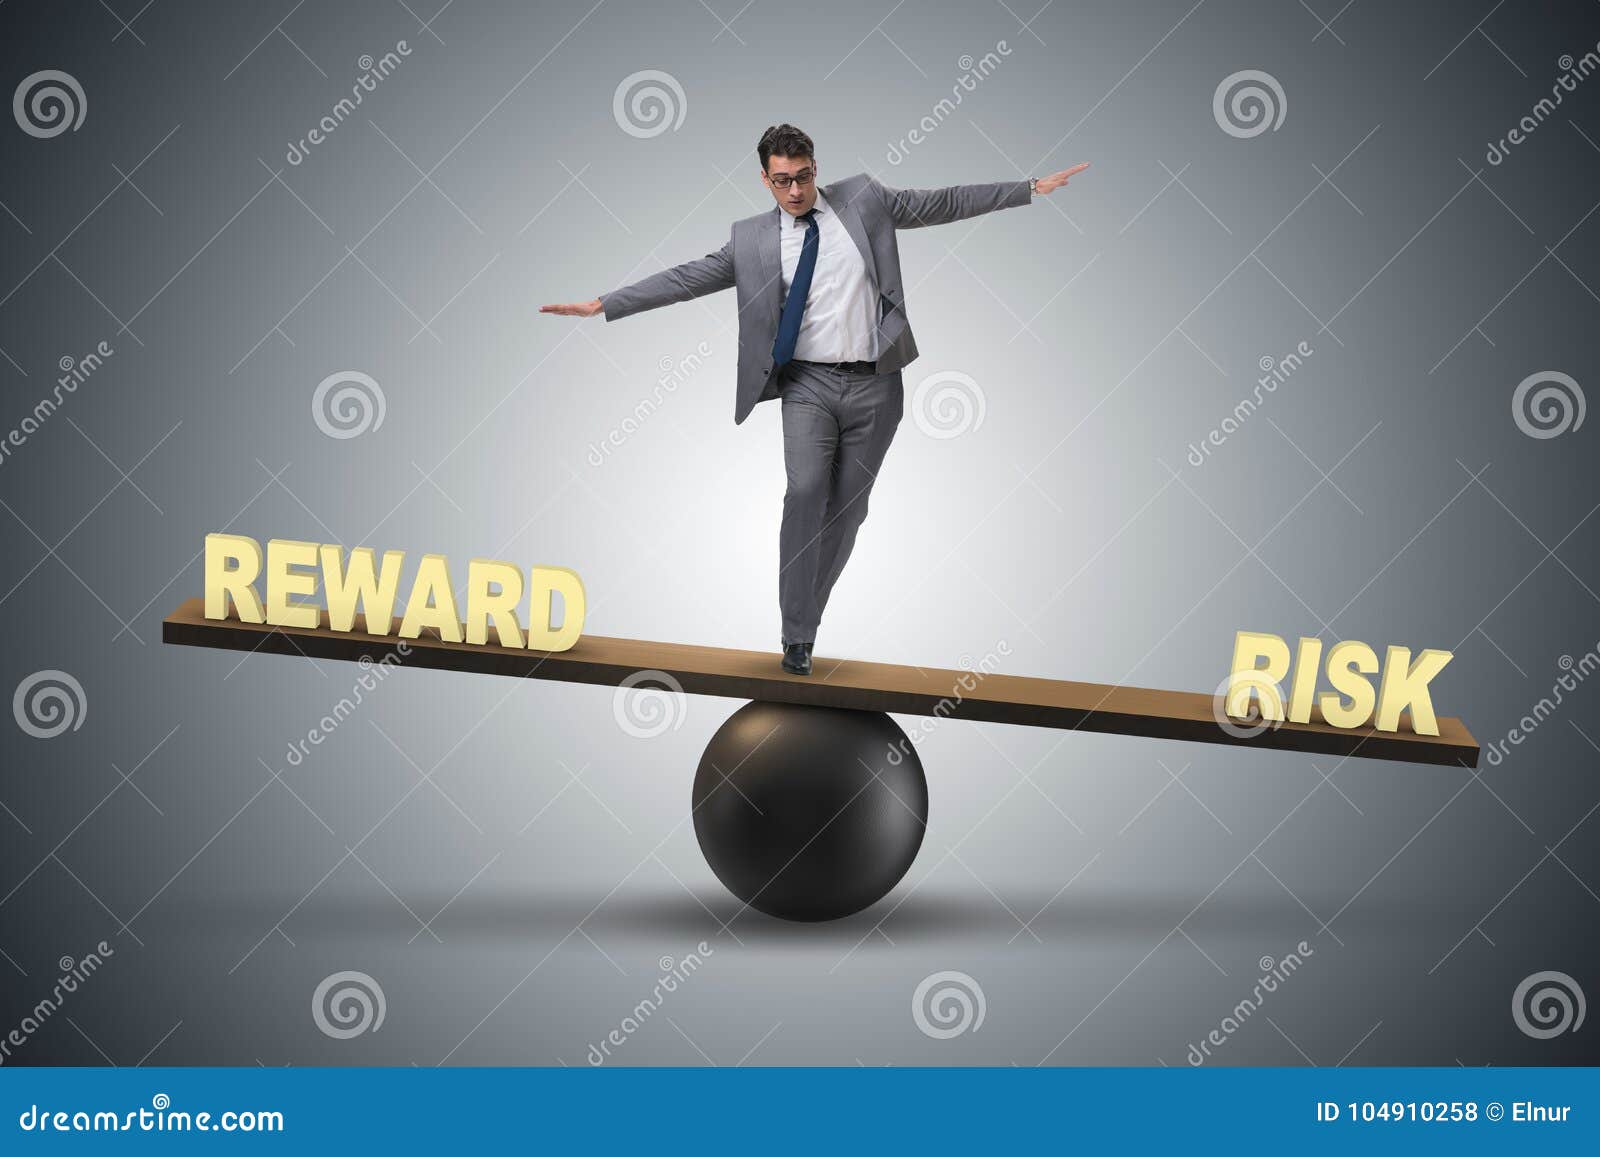 the businessman balancing between reward and risk business concept